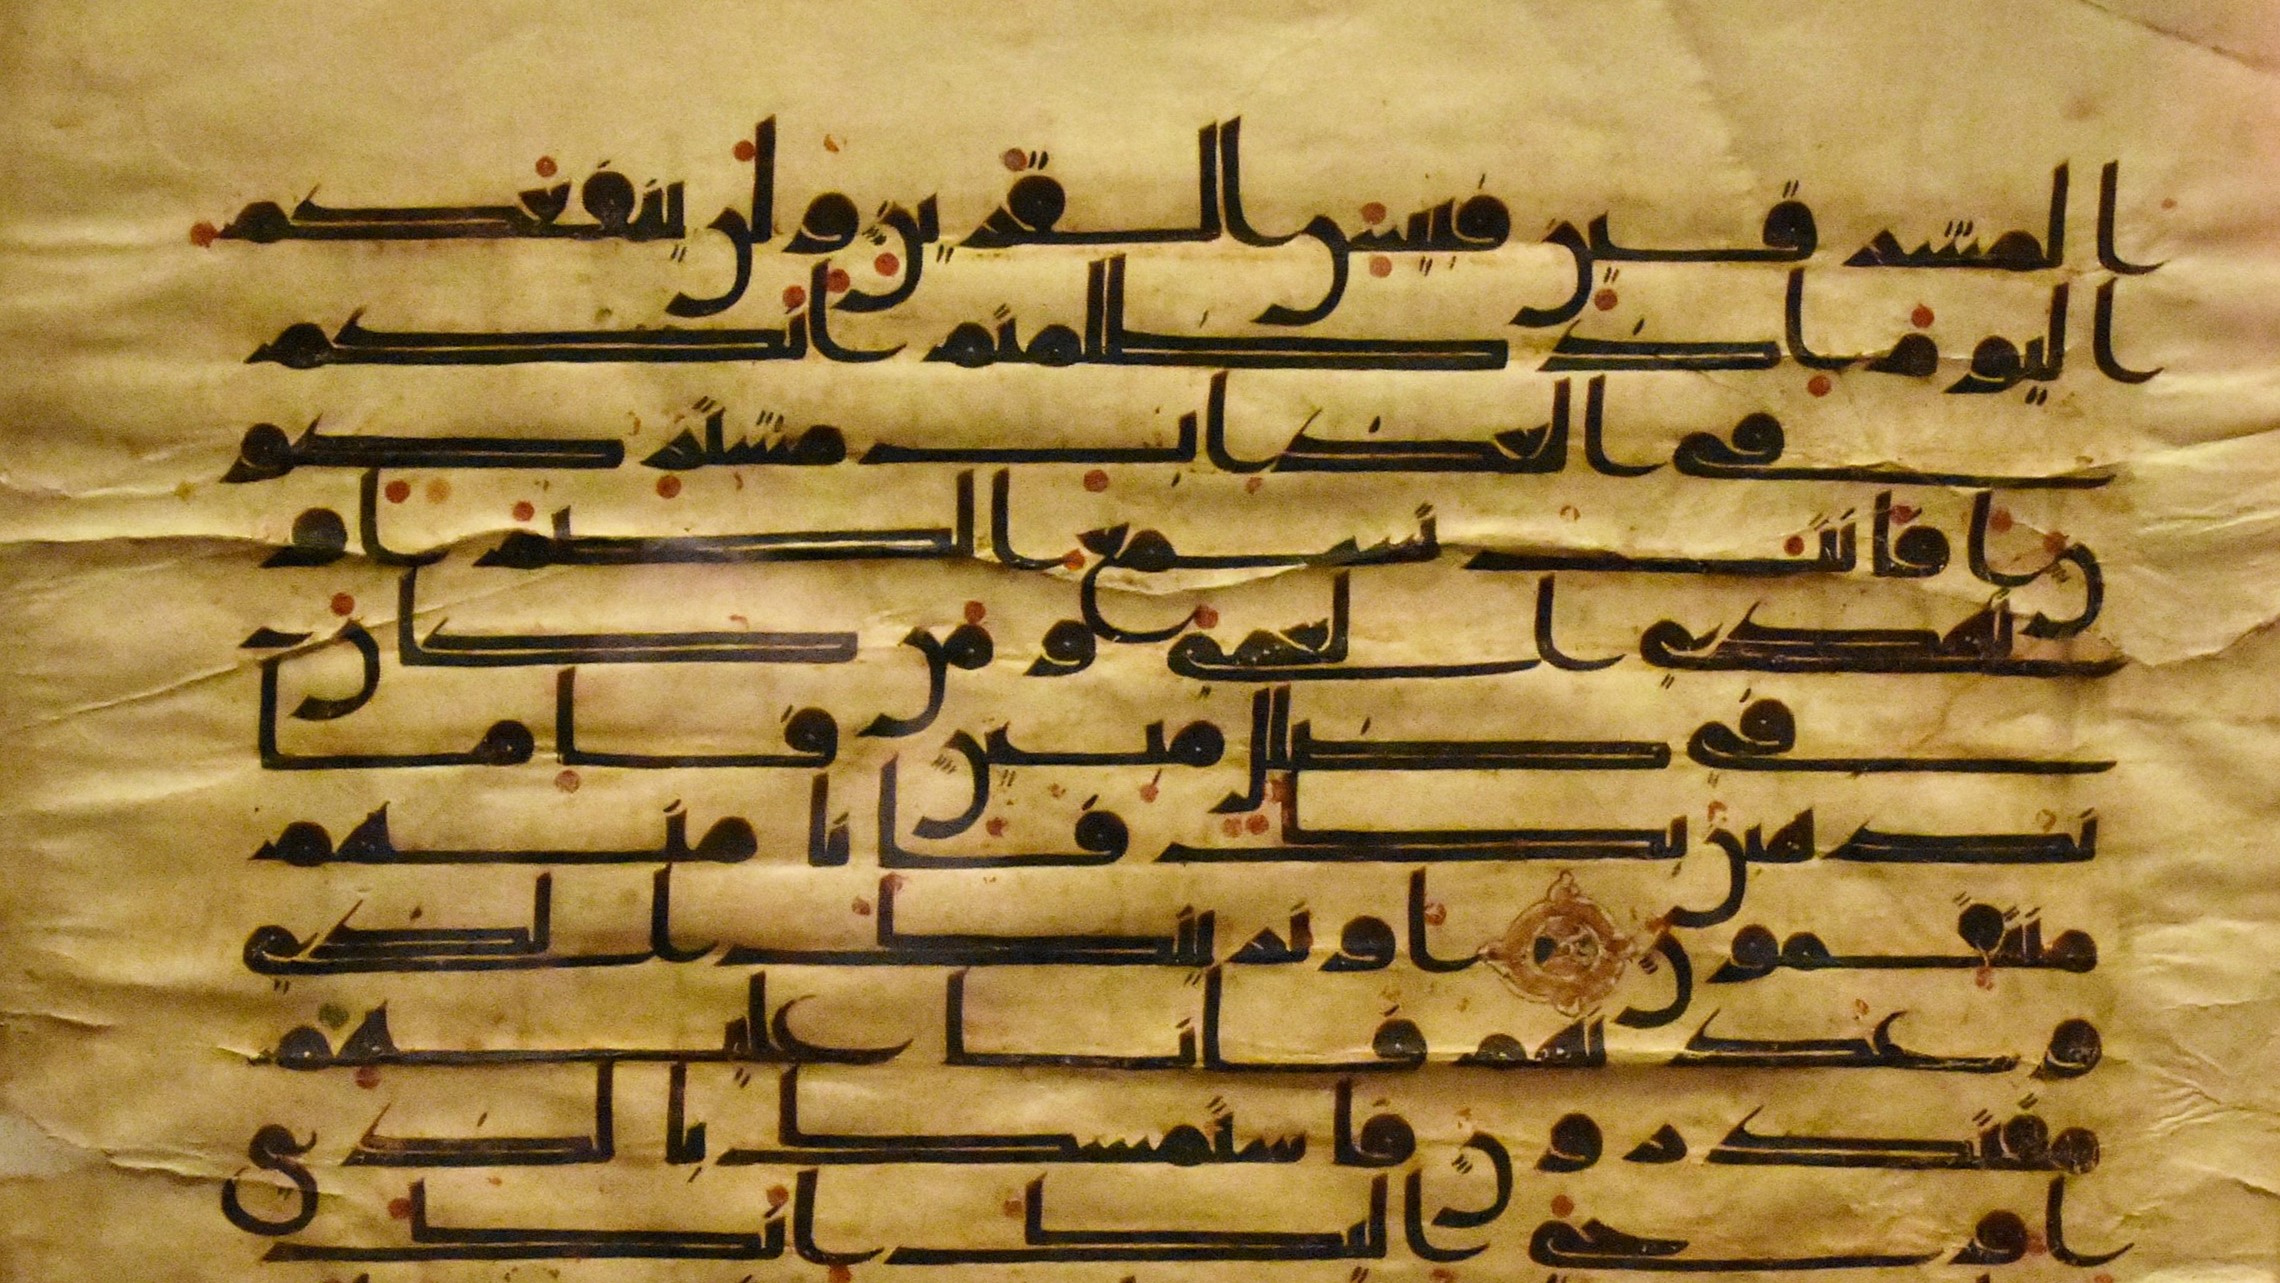 Parchment_leaf_from_a_copy_of_the_Quran_written_in_Kufic_script,_Syria,_mid_8th_century,_The_David_Collection,_Copenhagen